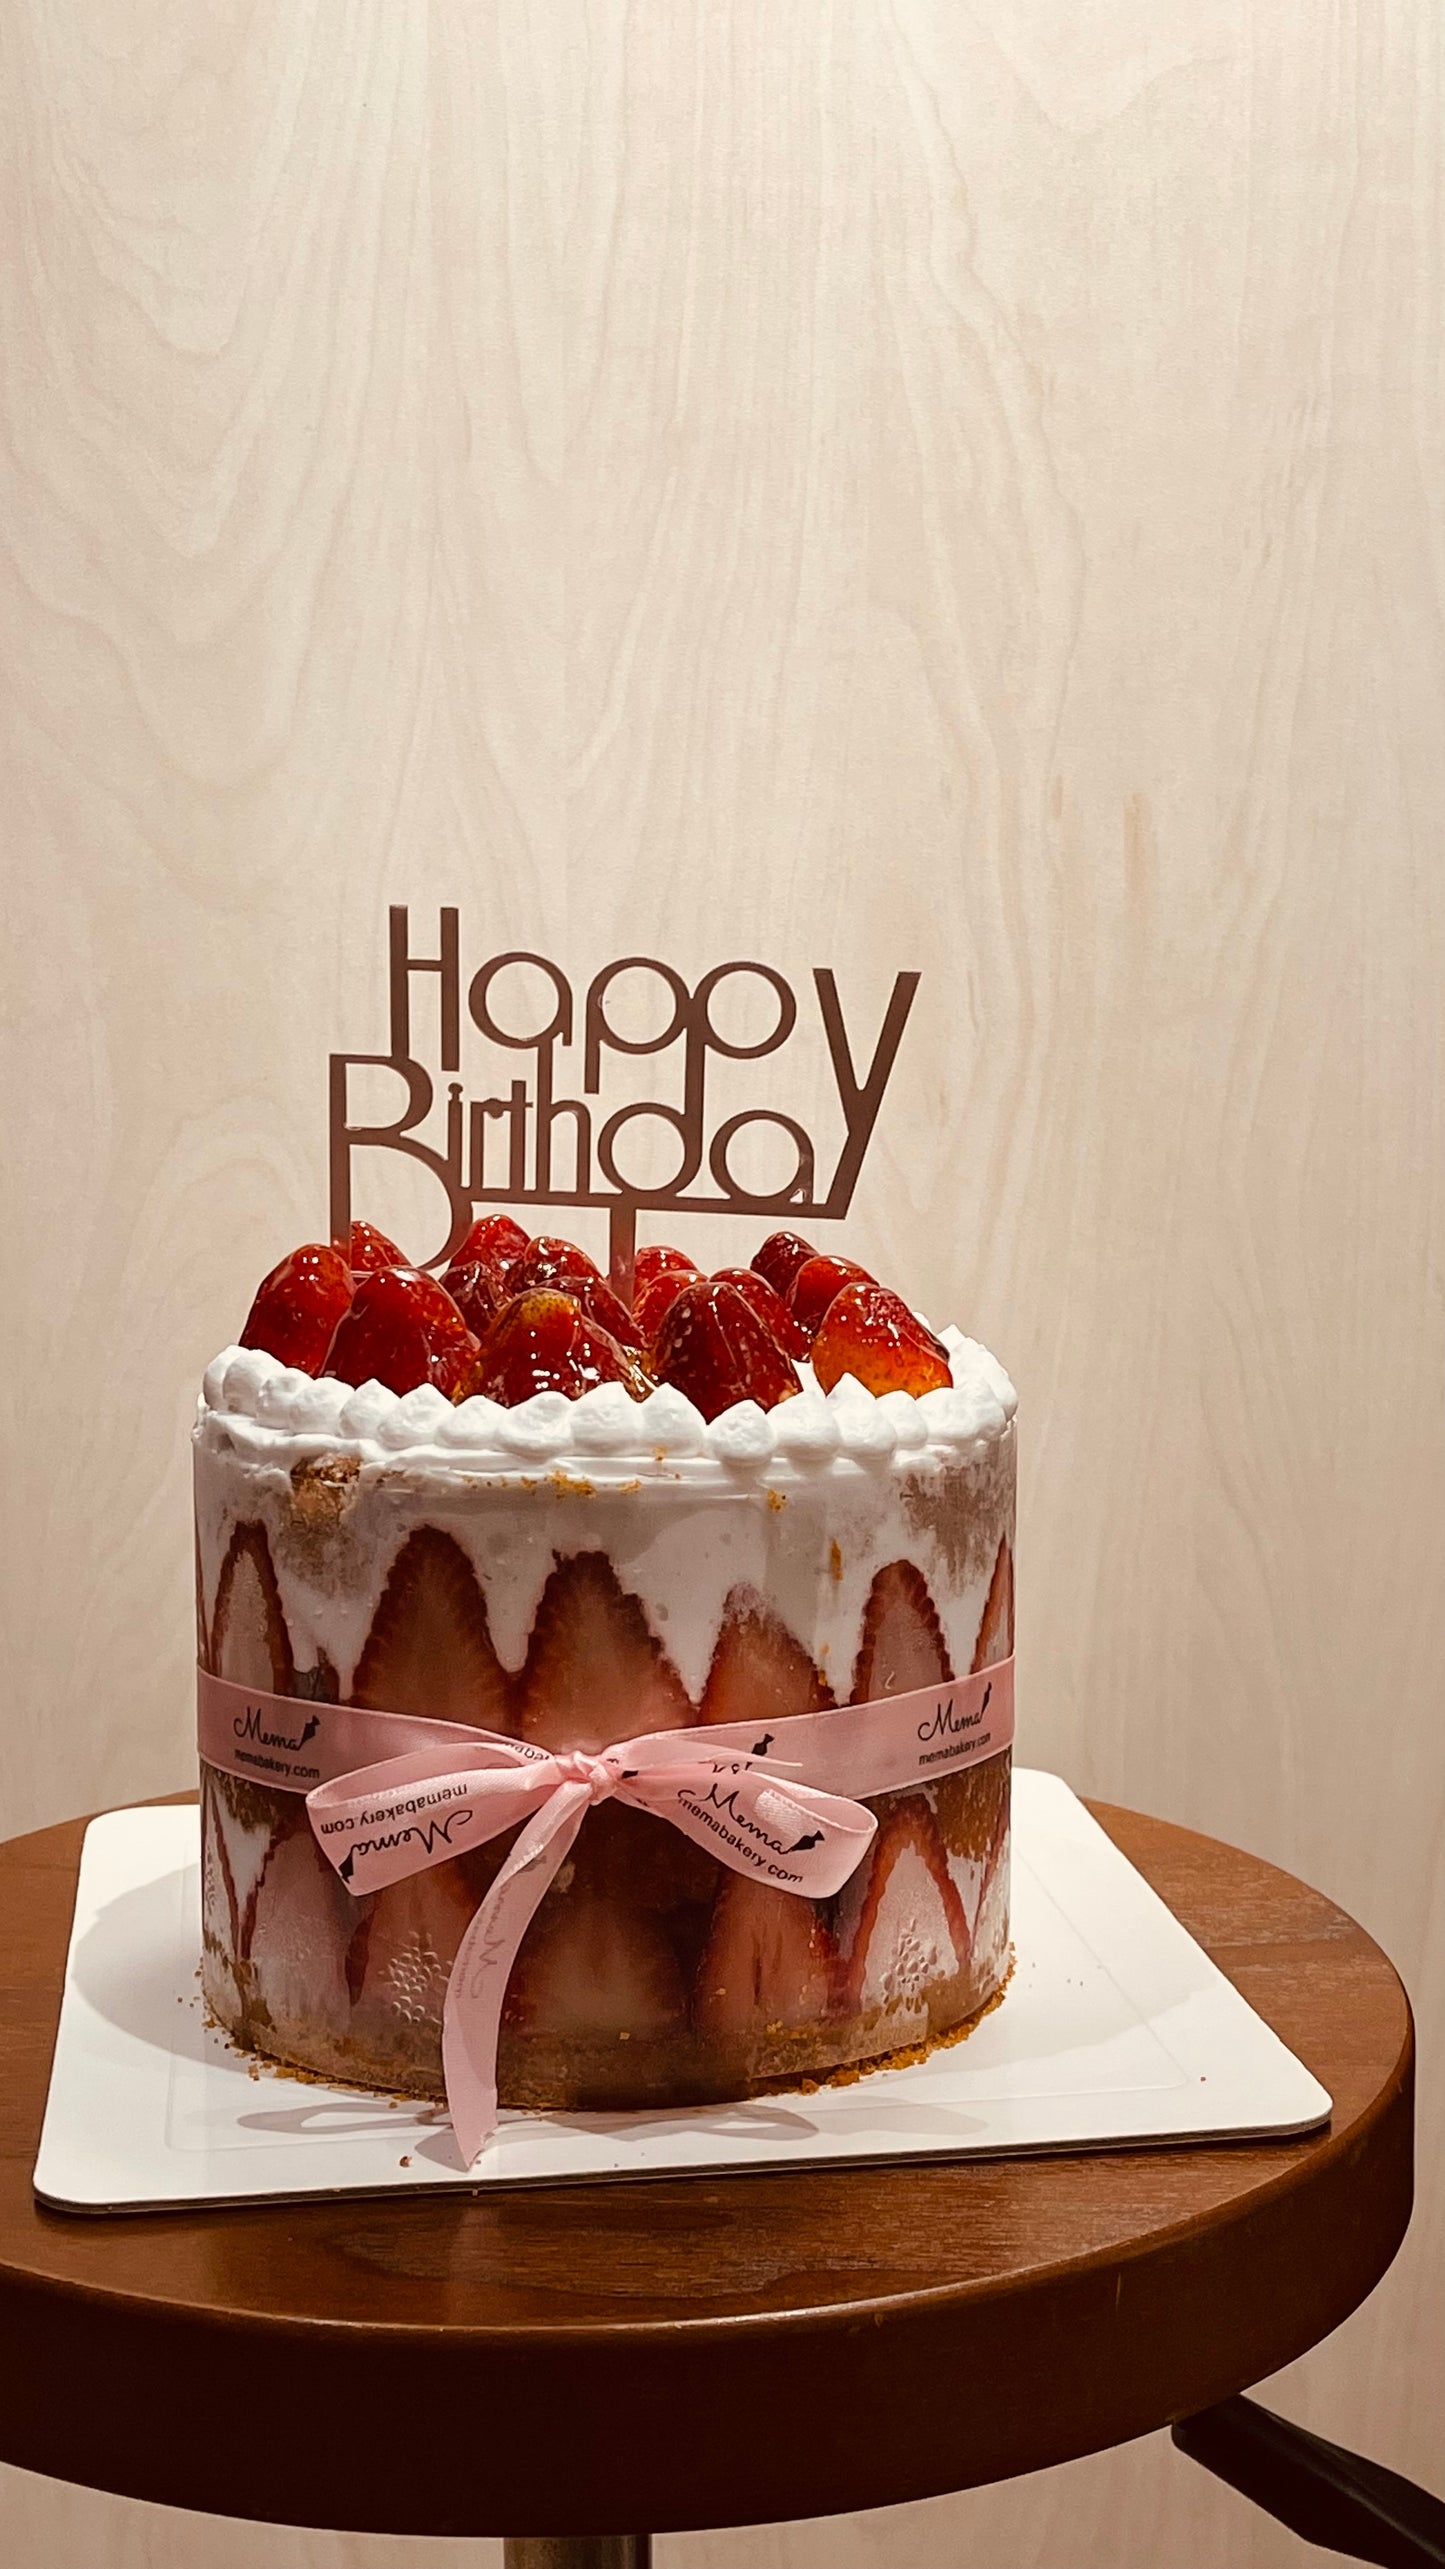 Longevity peach mousse cake Customized cakes for all occasions